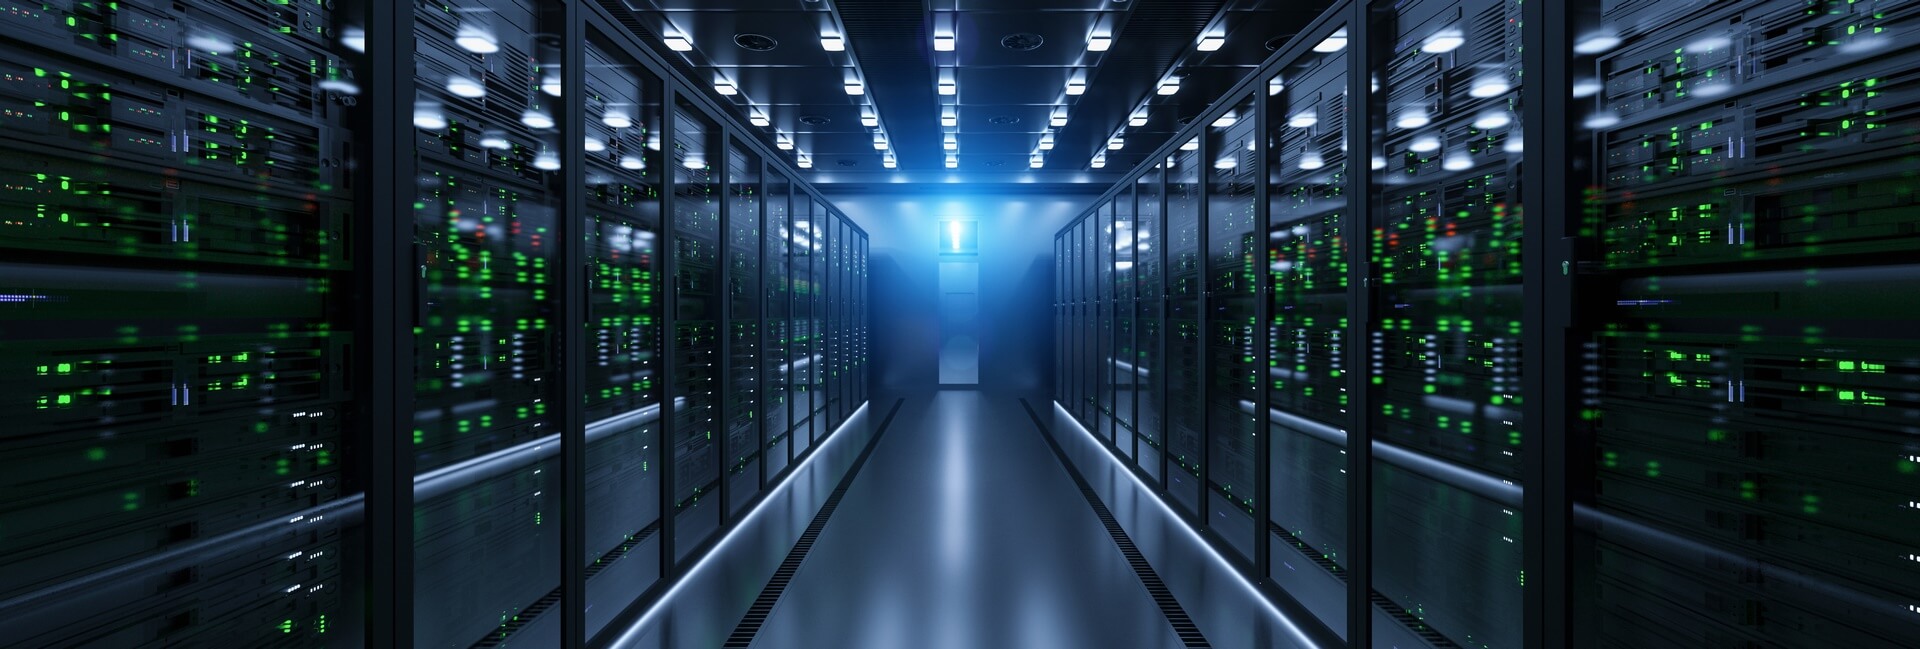 server-units-in-cloud-service-data-center-showing-flickering-light-indicators-for-massive-data-connection-bandwidth